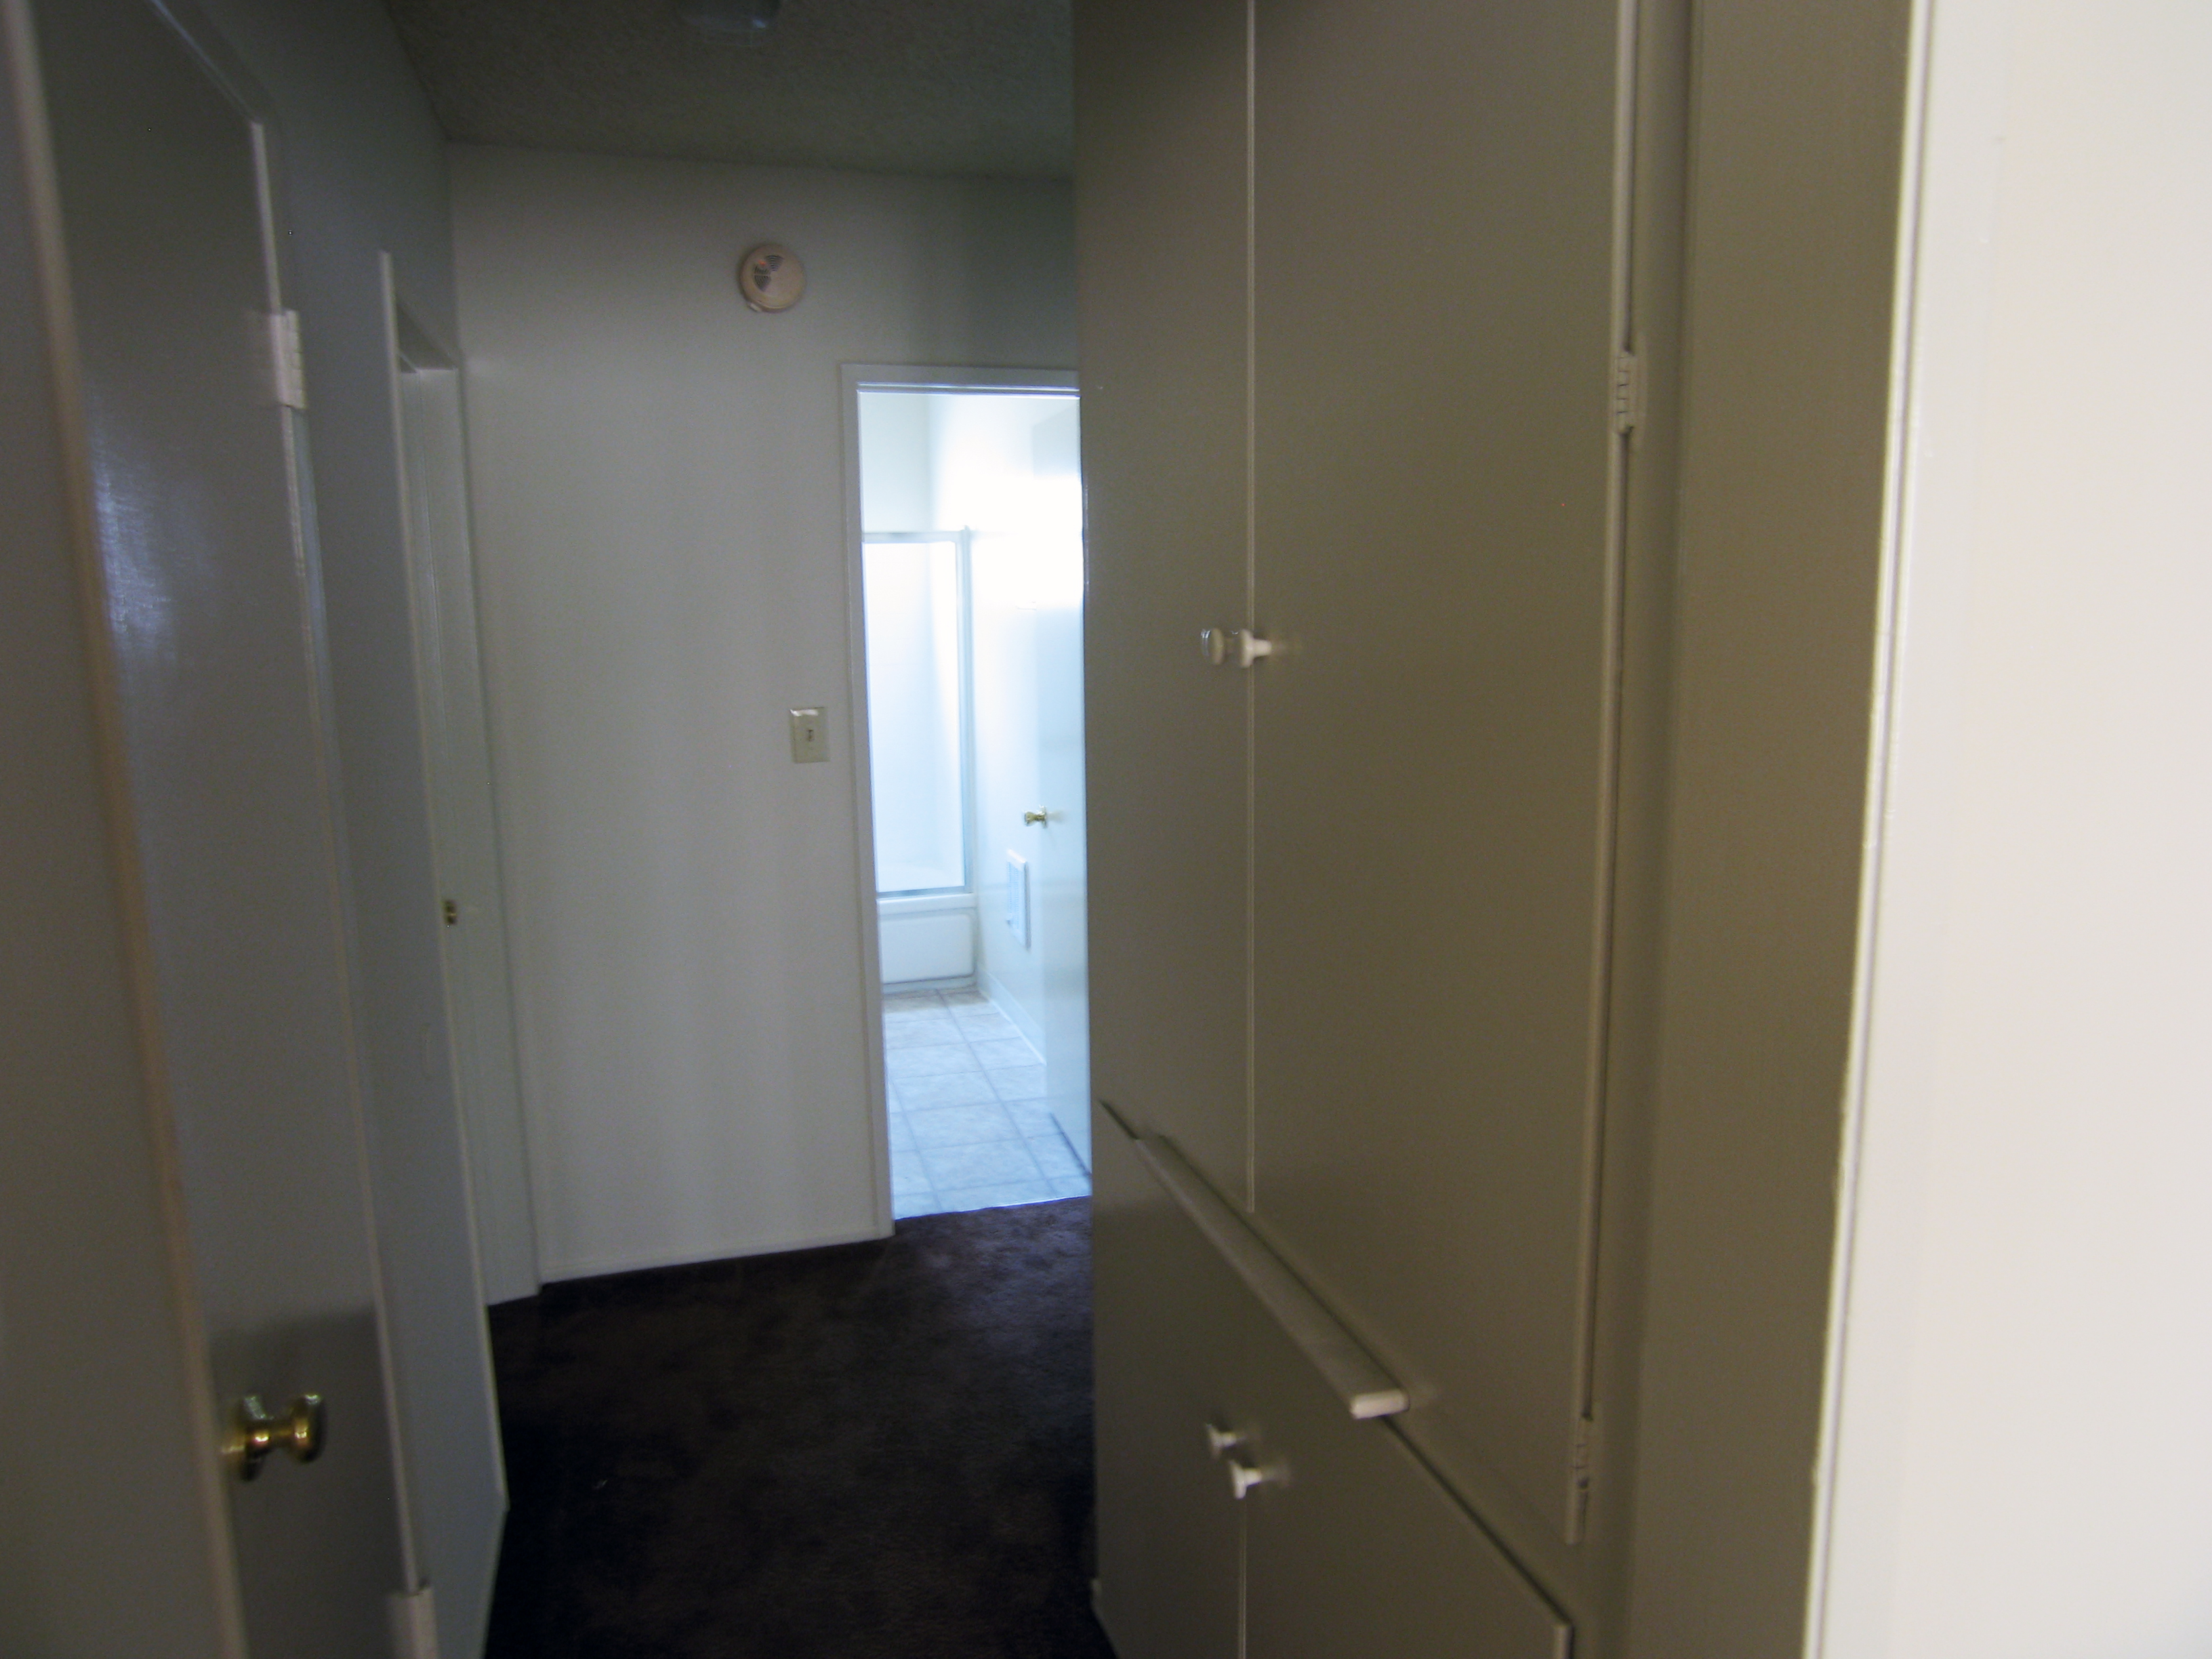 Image of the apartment hallway and closets